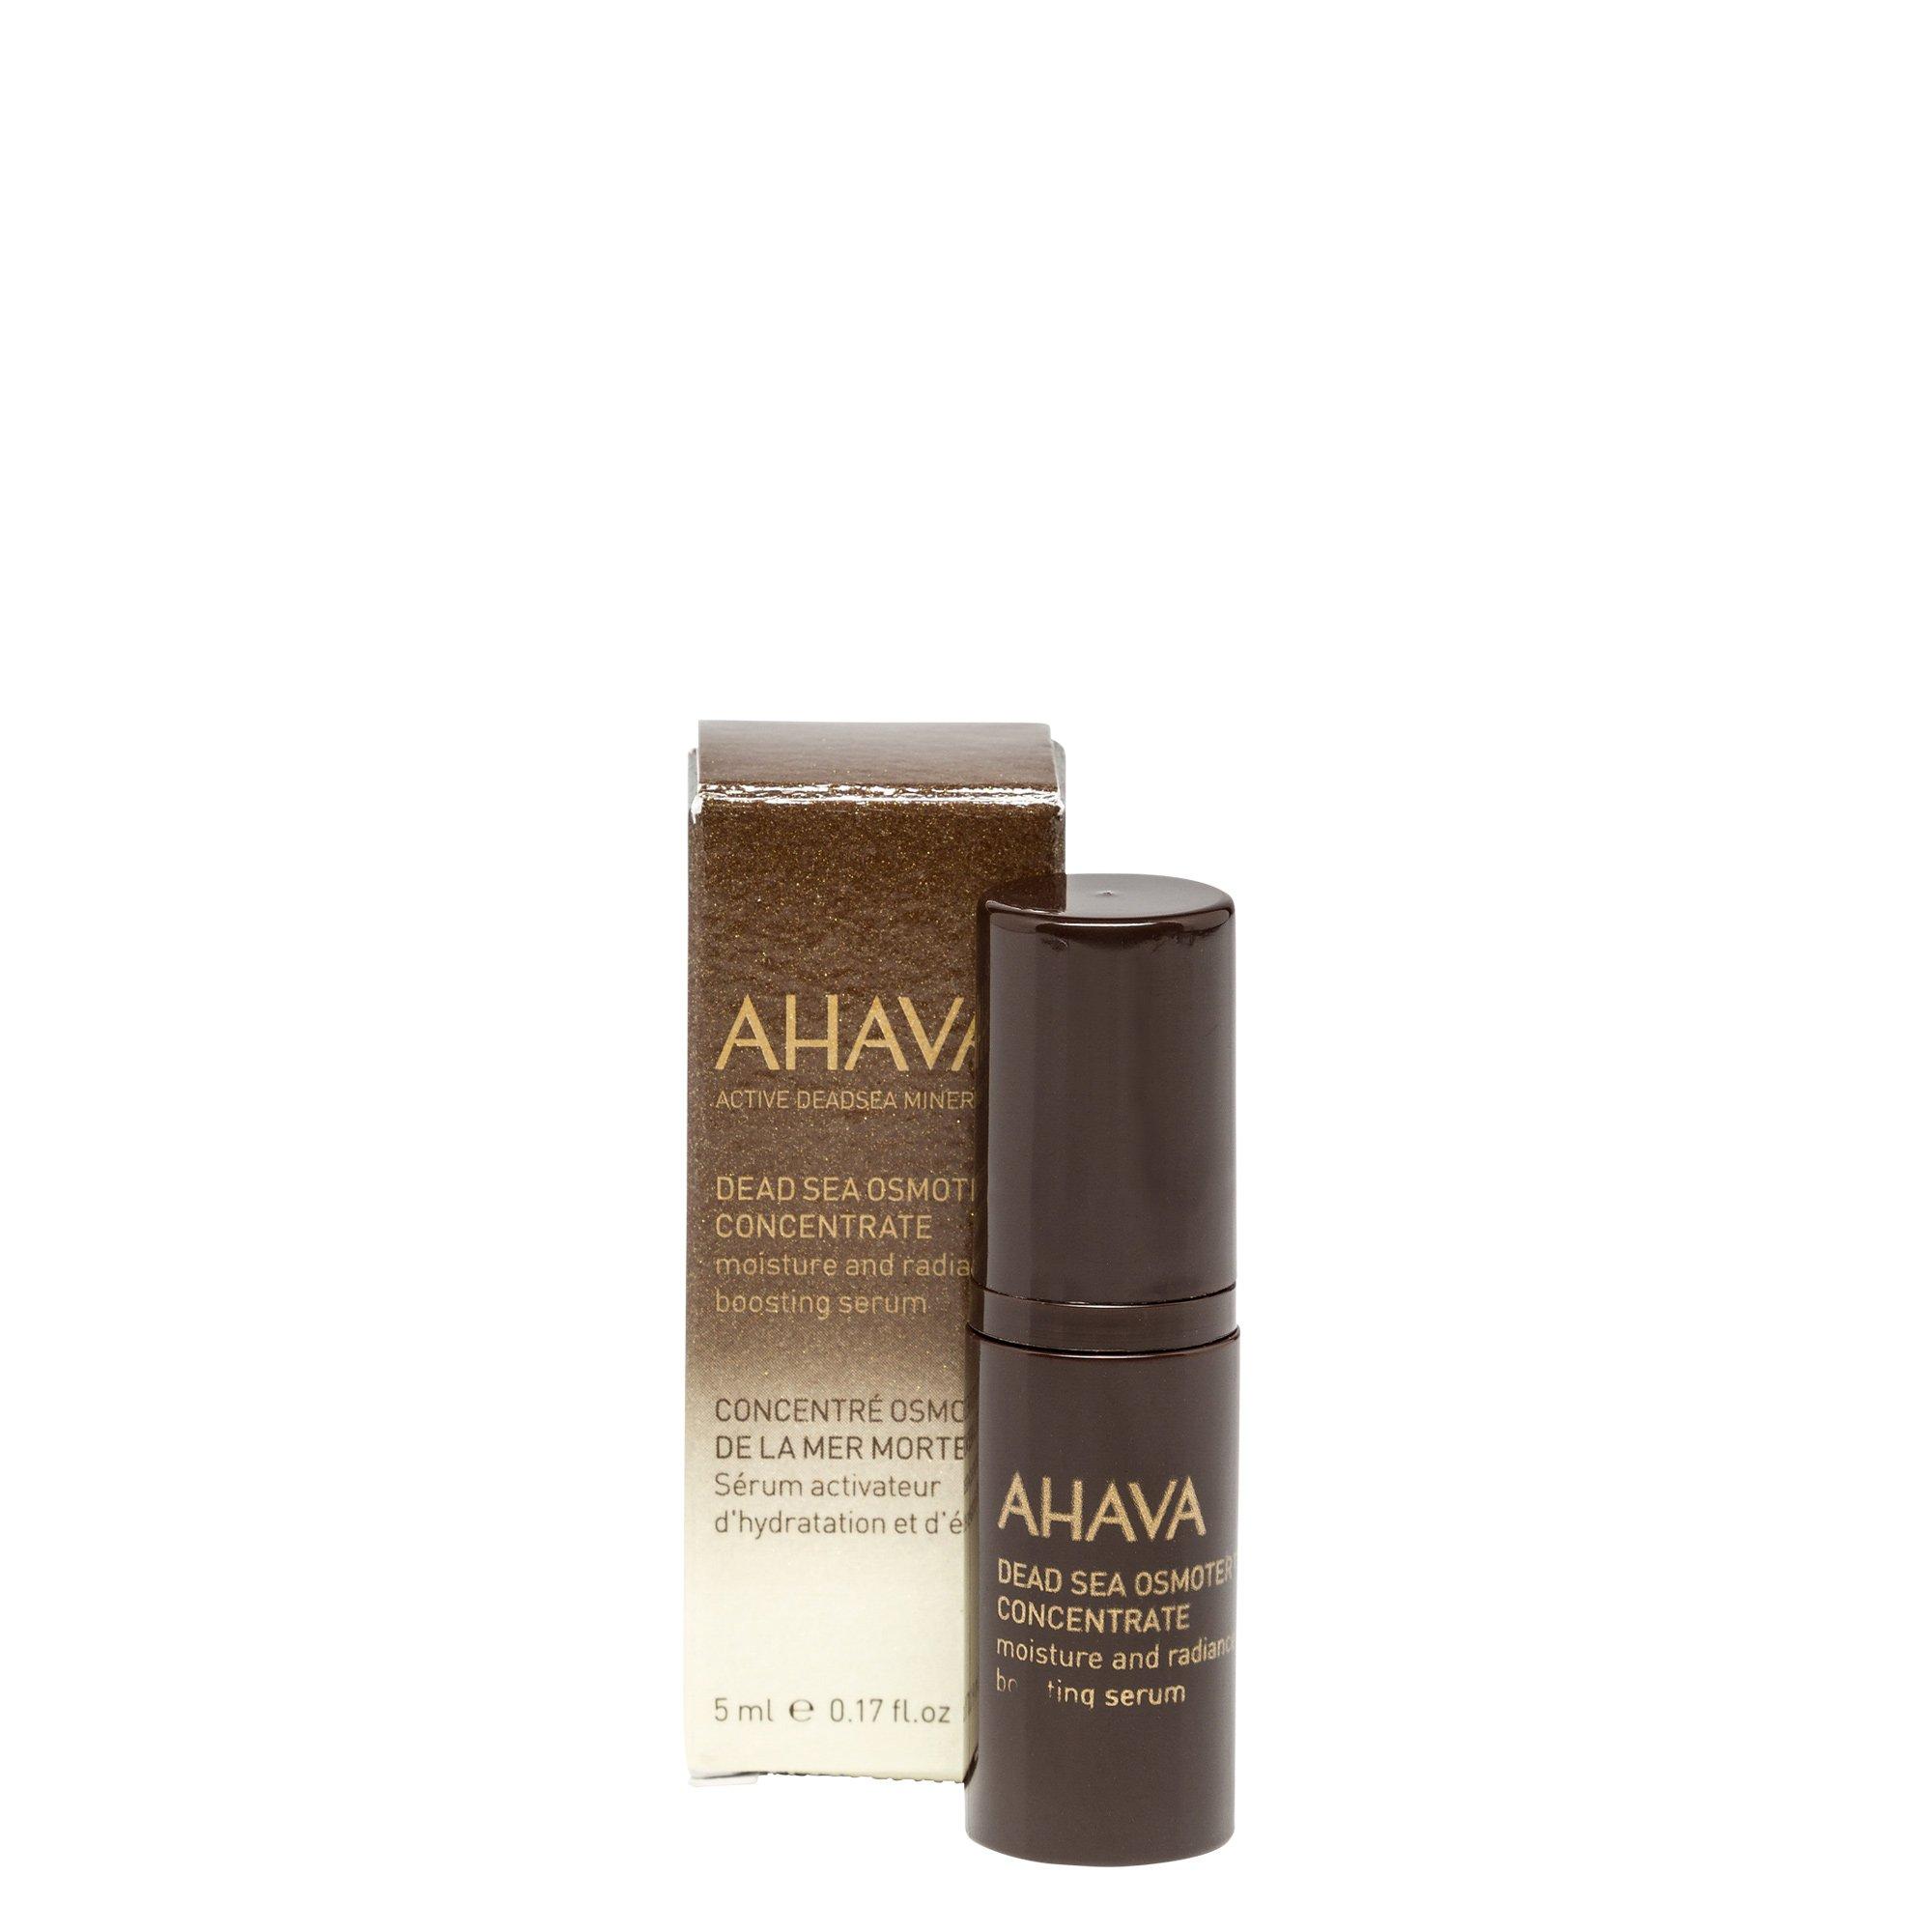 Image of AHAVA Deadsea Osmotor Concentrate - 15ml